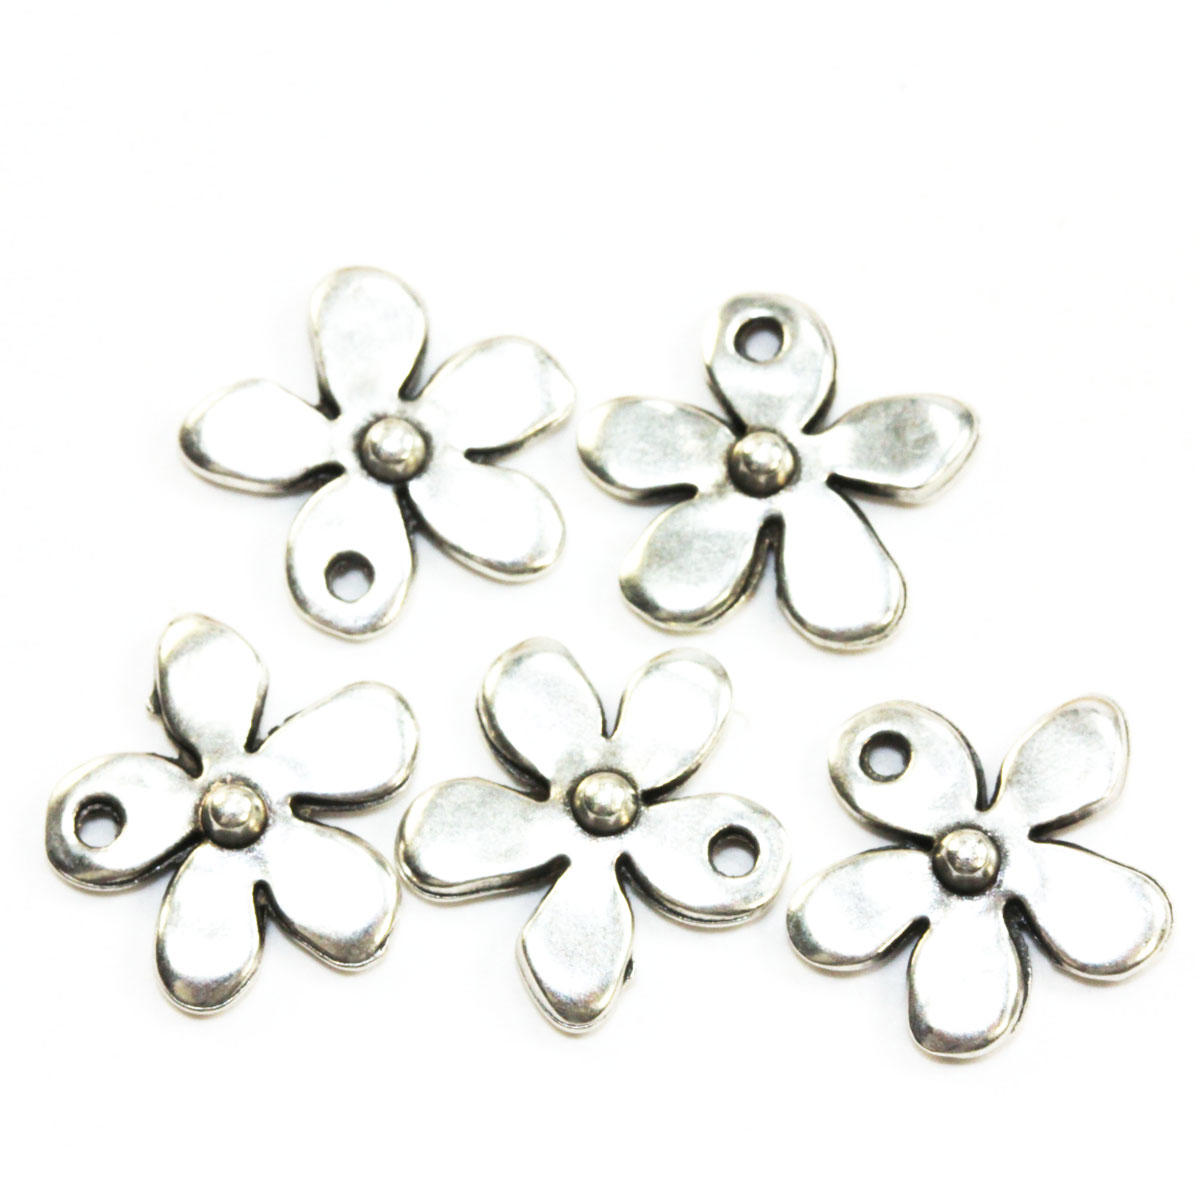 29854          4 Pc  Matte Silver Oxidized Small Victorian Flower Charm Finding 